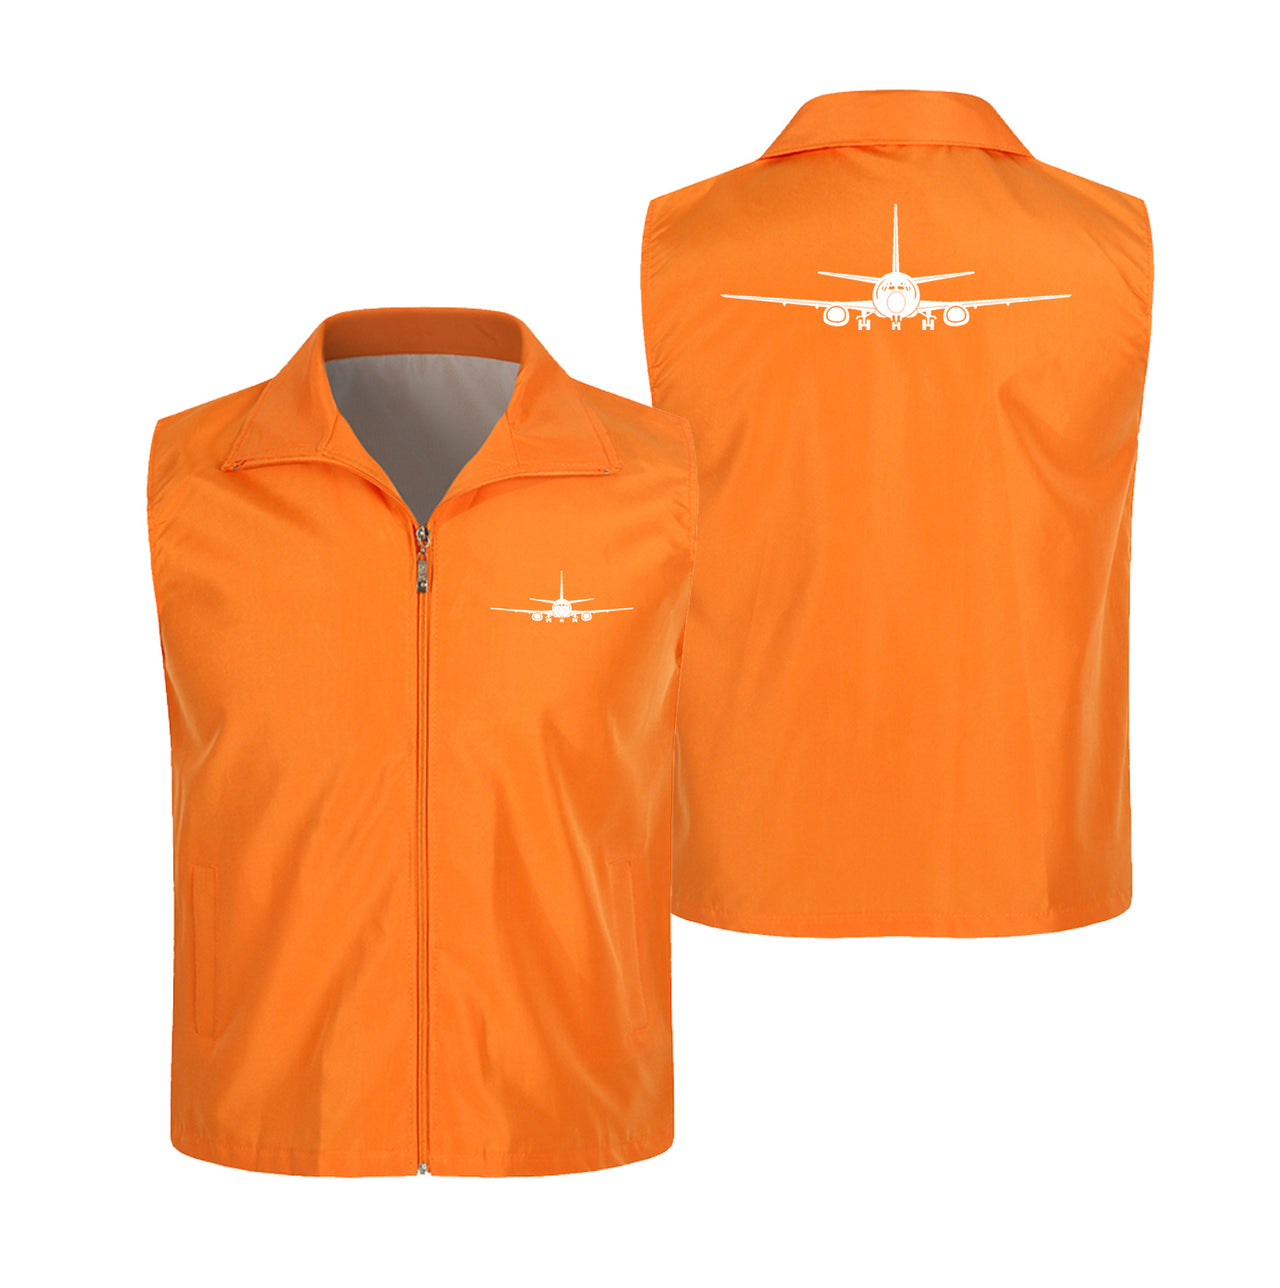 Boeing 737 Silhouette Designed Thin Style Vests